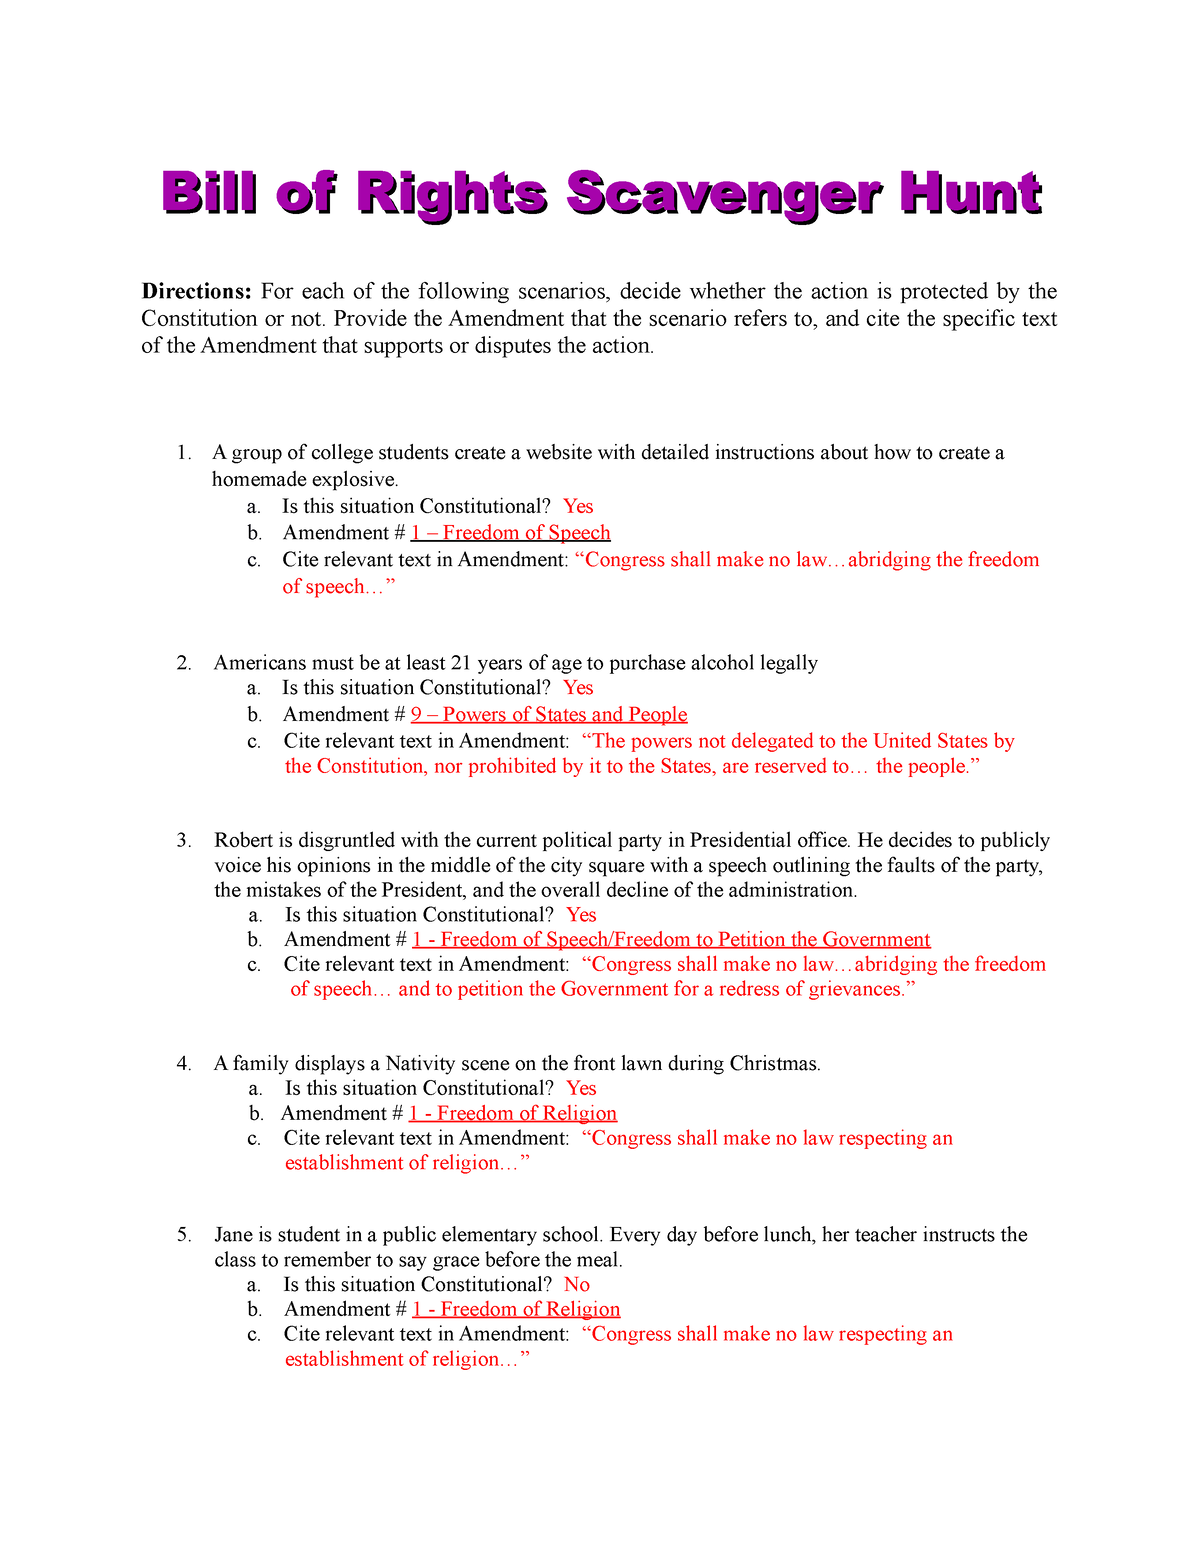 bill-of-rights-scavenger-hunt-key-directions-for-each-of-the